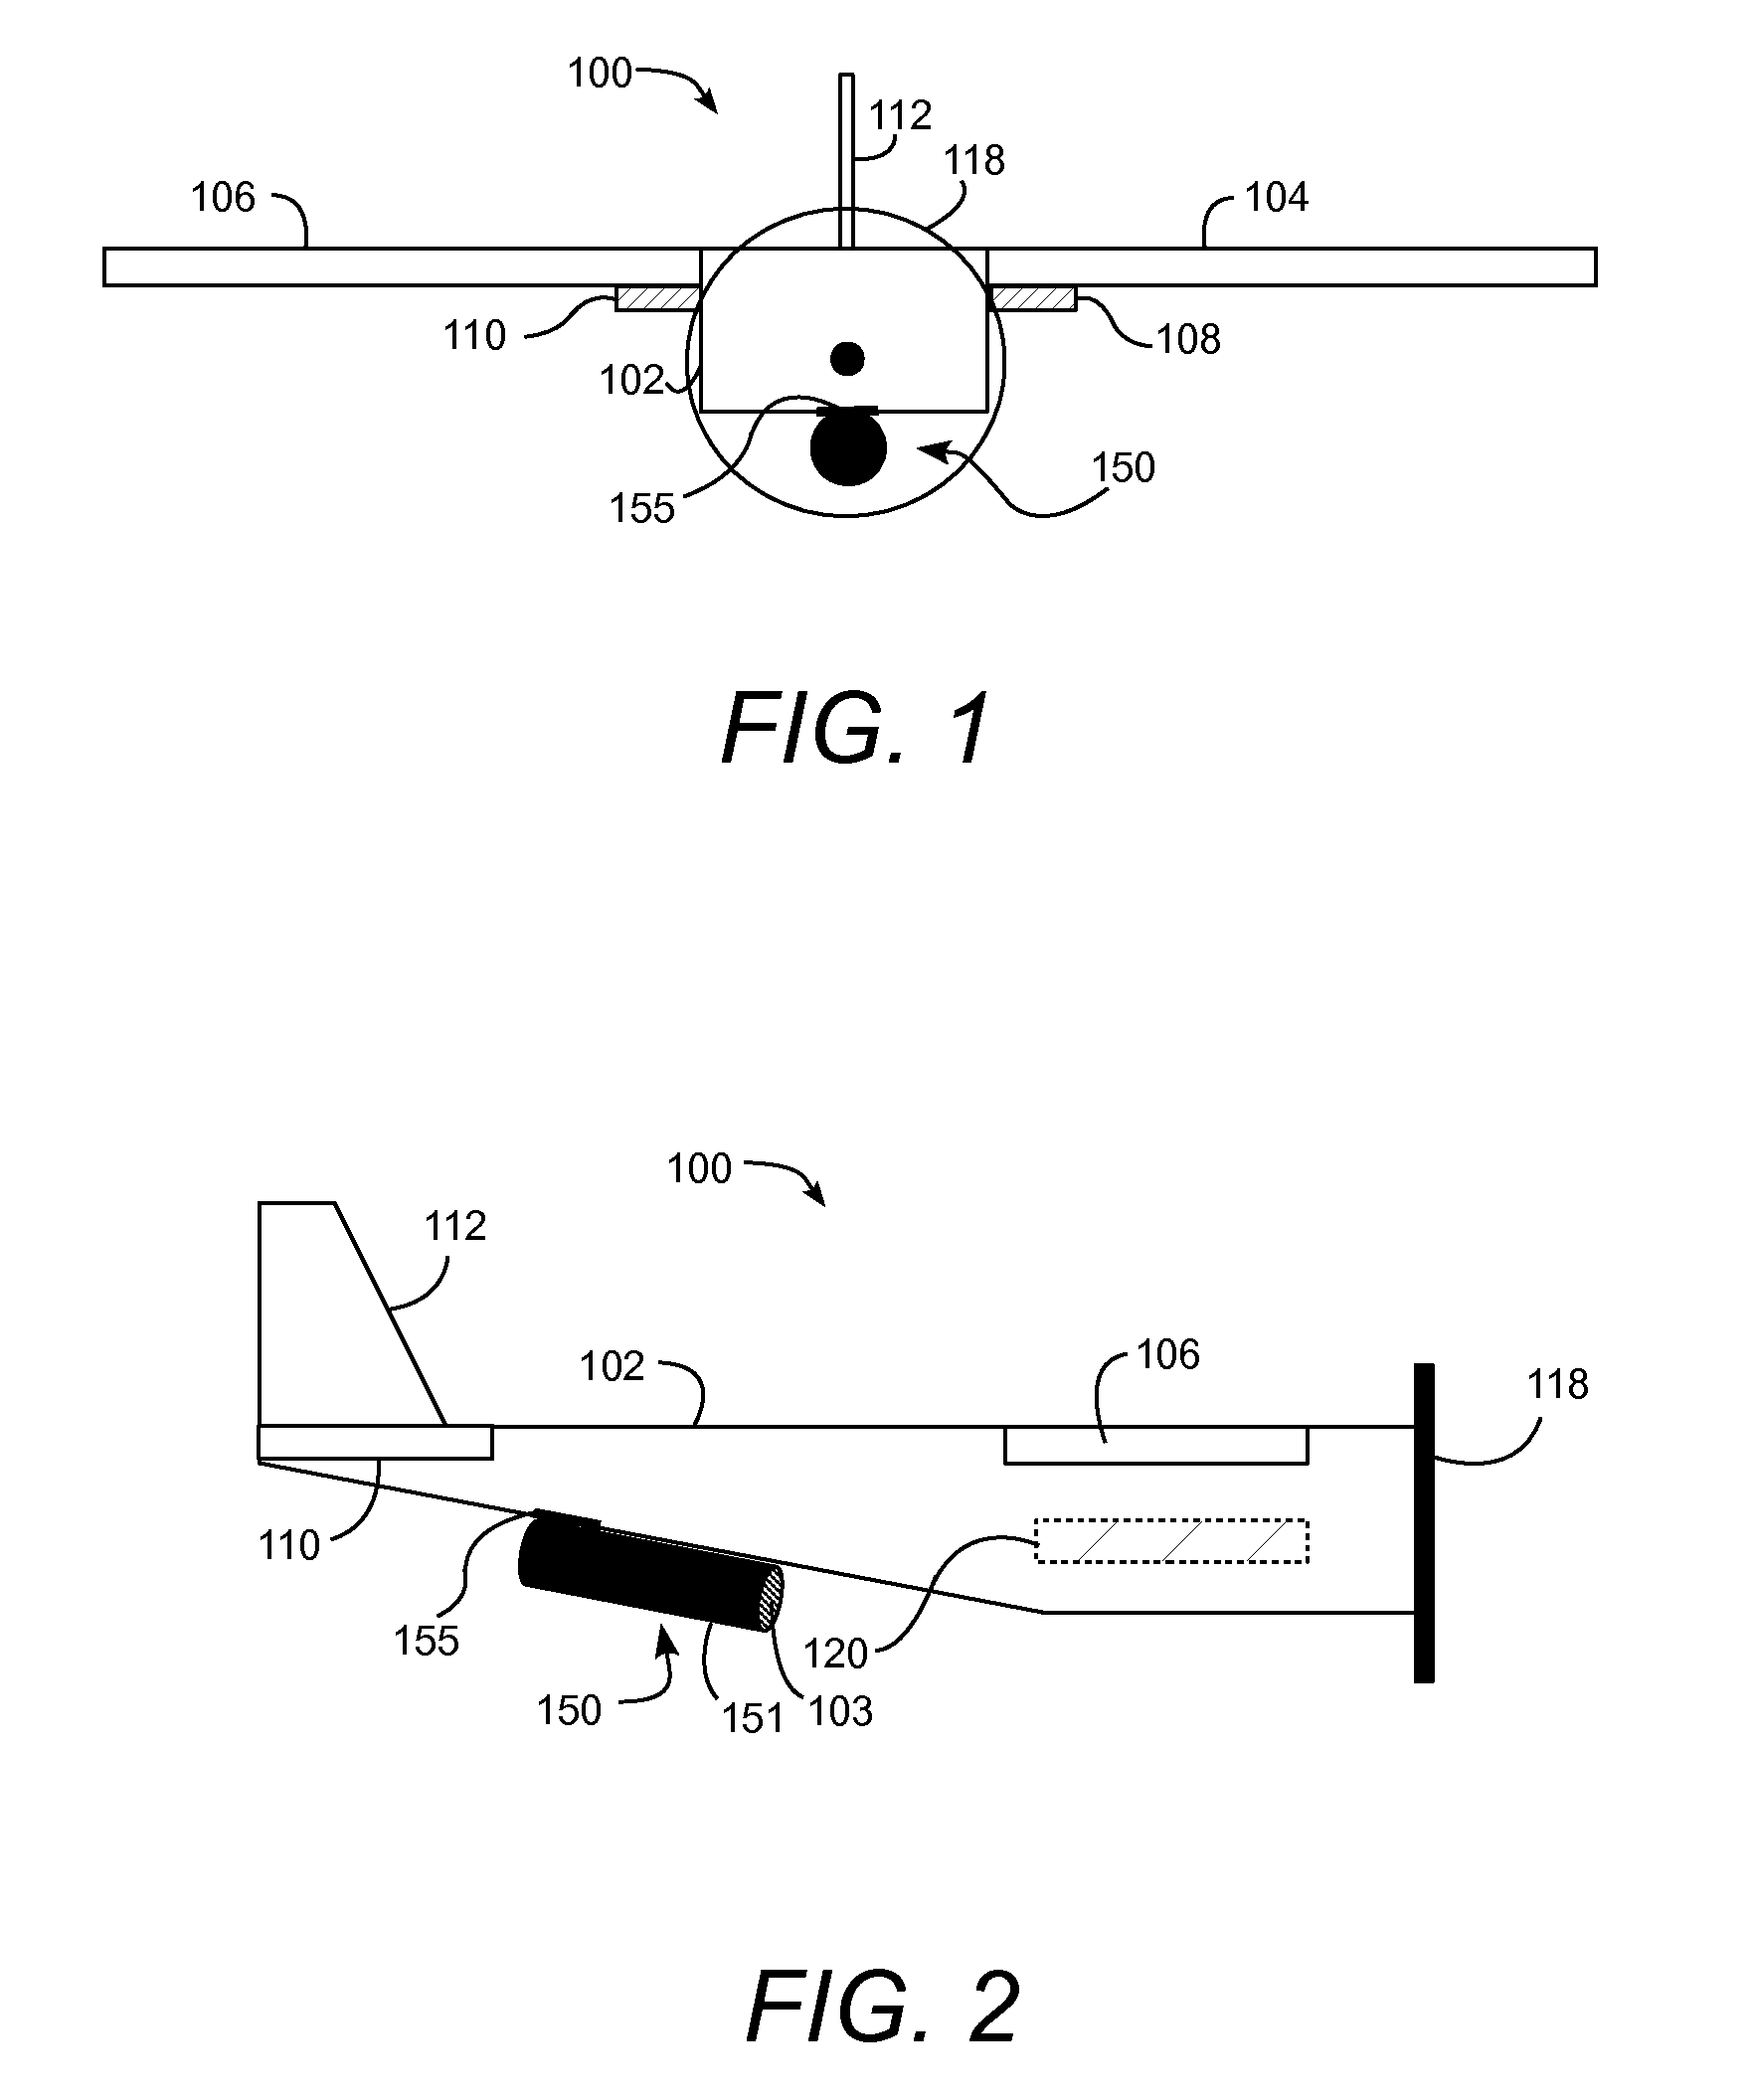 Auto-injector countermeasure for unmanned aerial vehicles